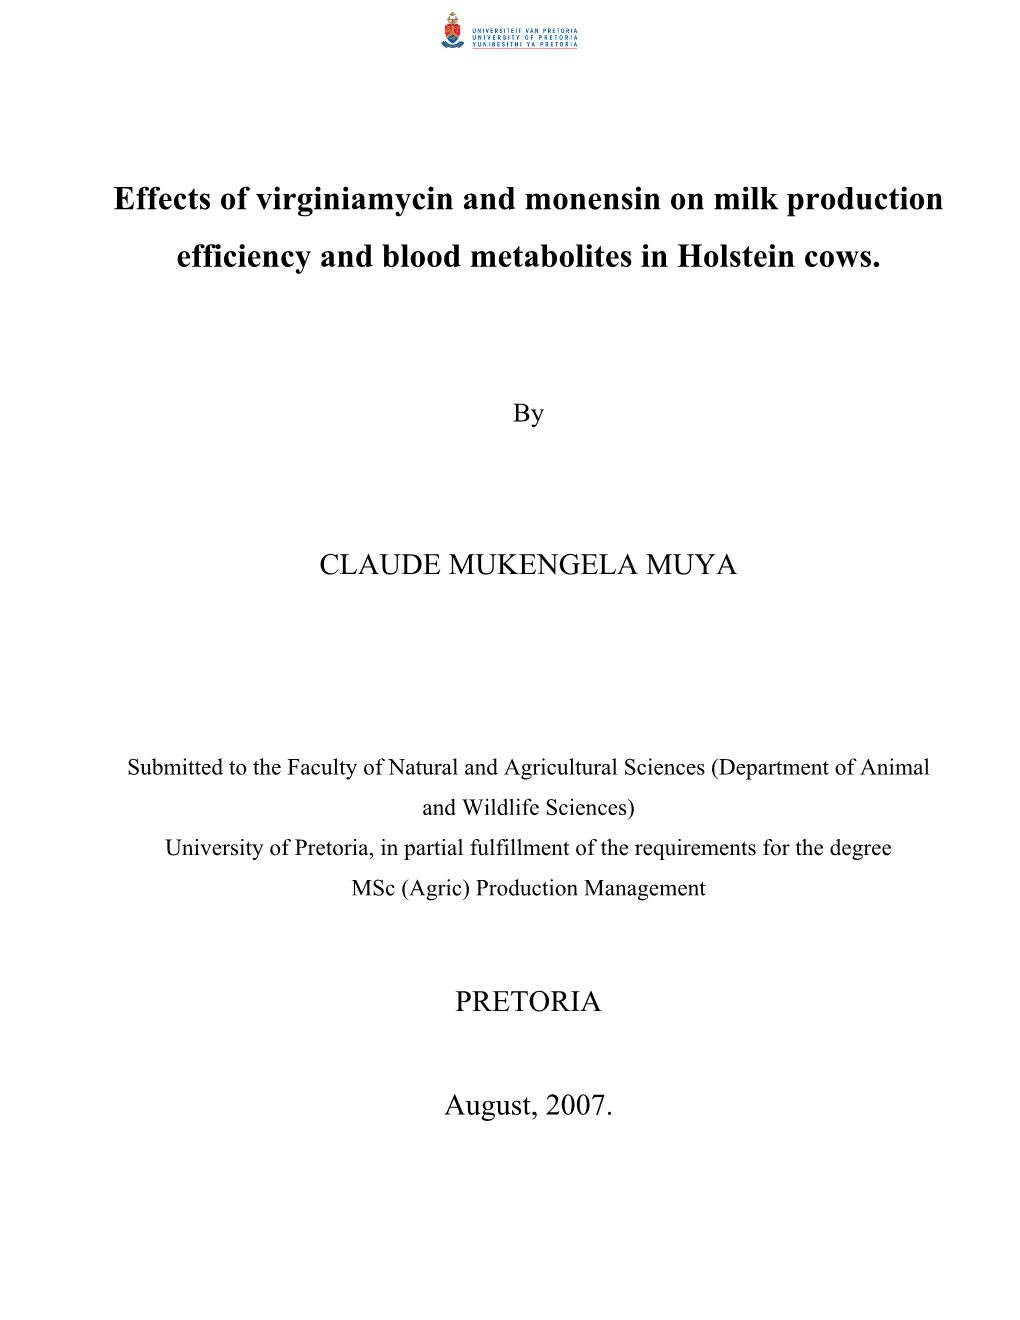 The Effects of Virginiamycin and Monensin on the Productivity of Holstein Cows